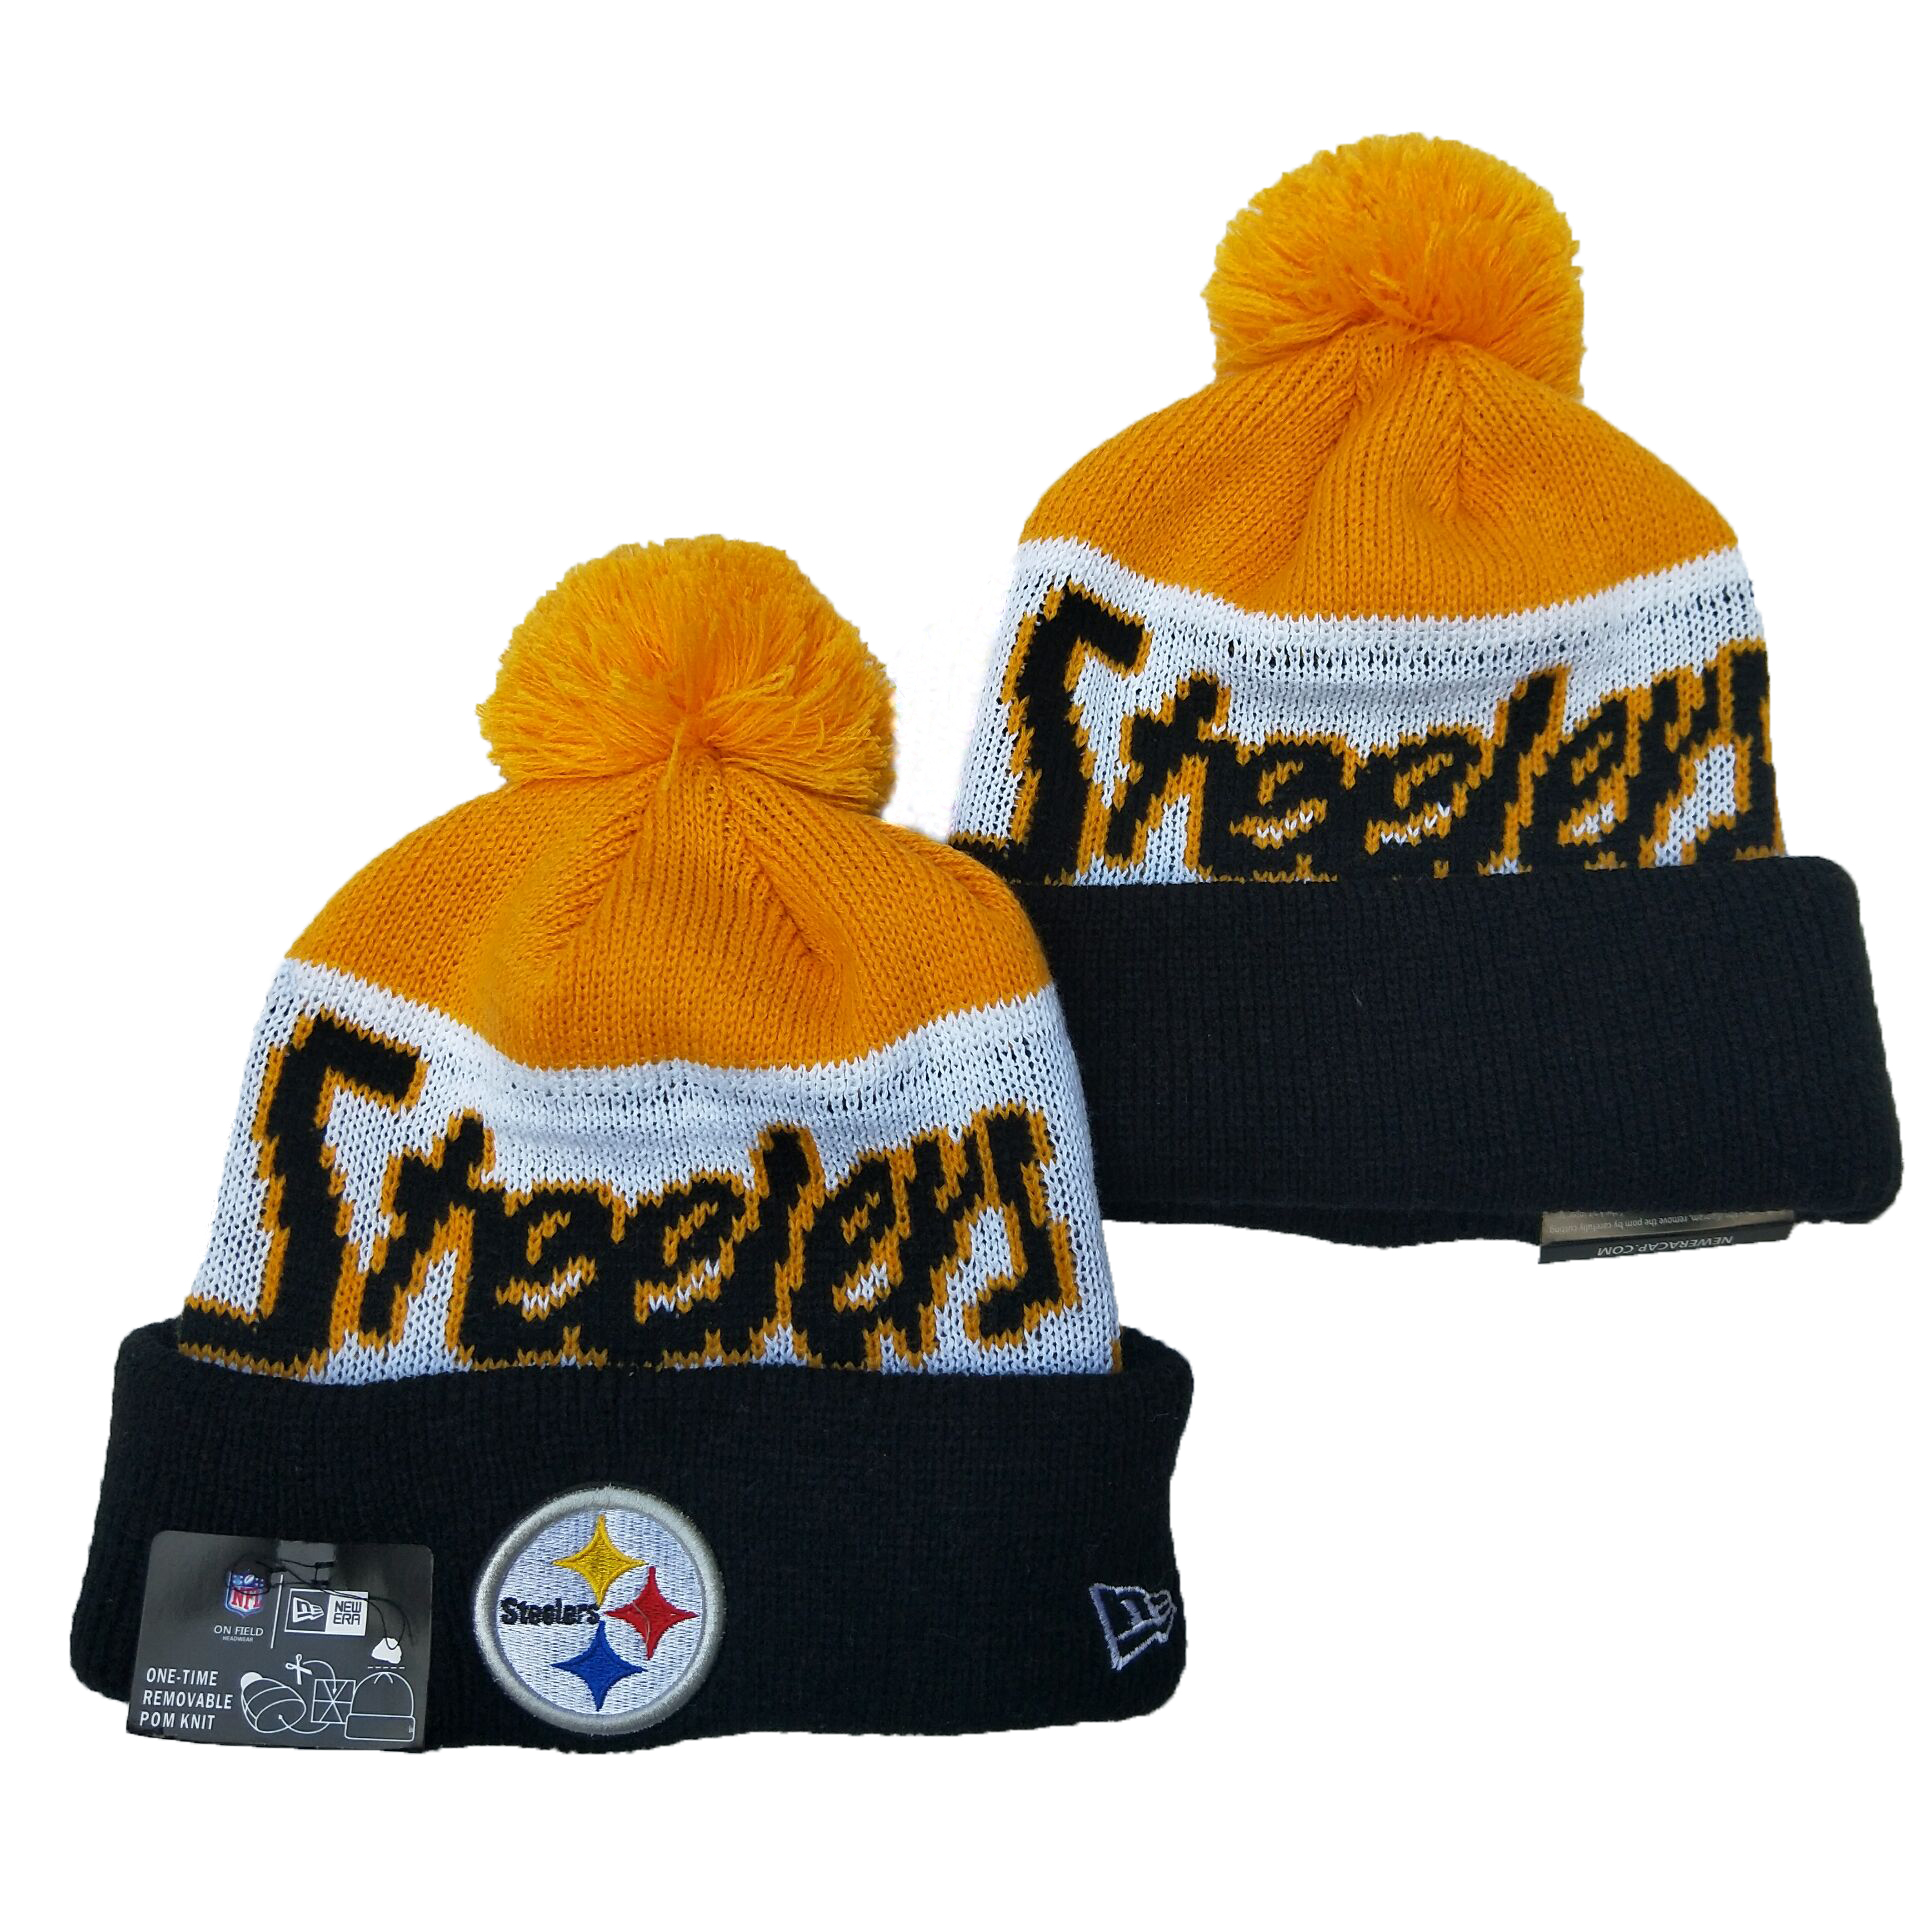 Pittsburgh Steelers Knit Hats 046